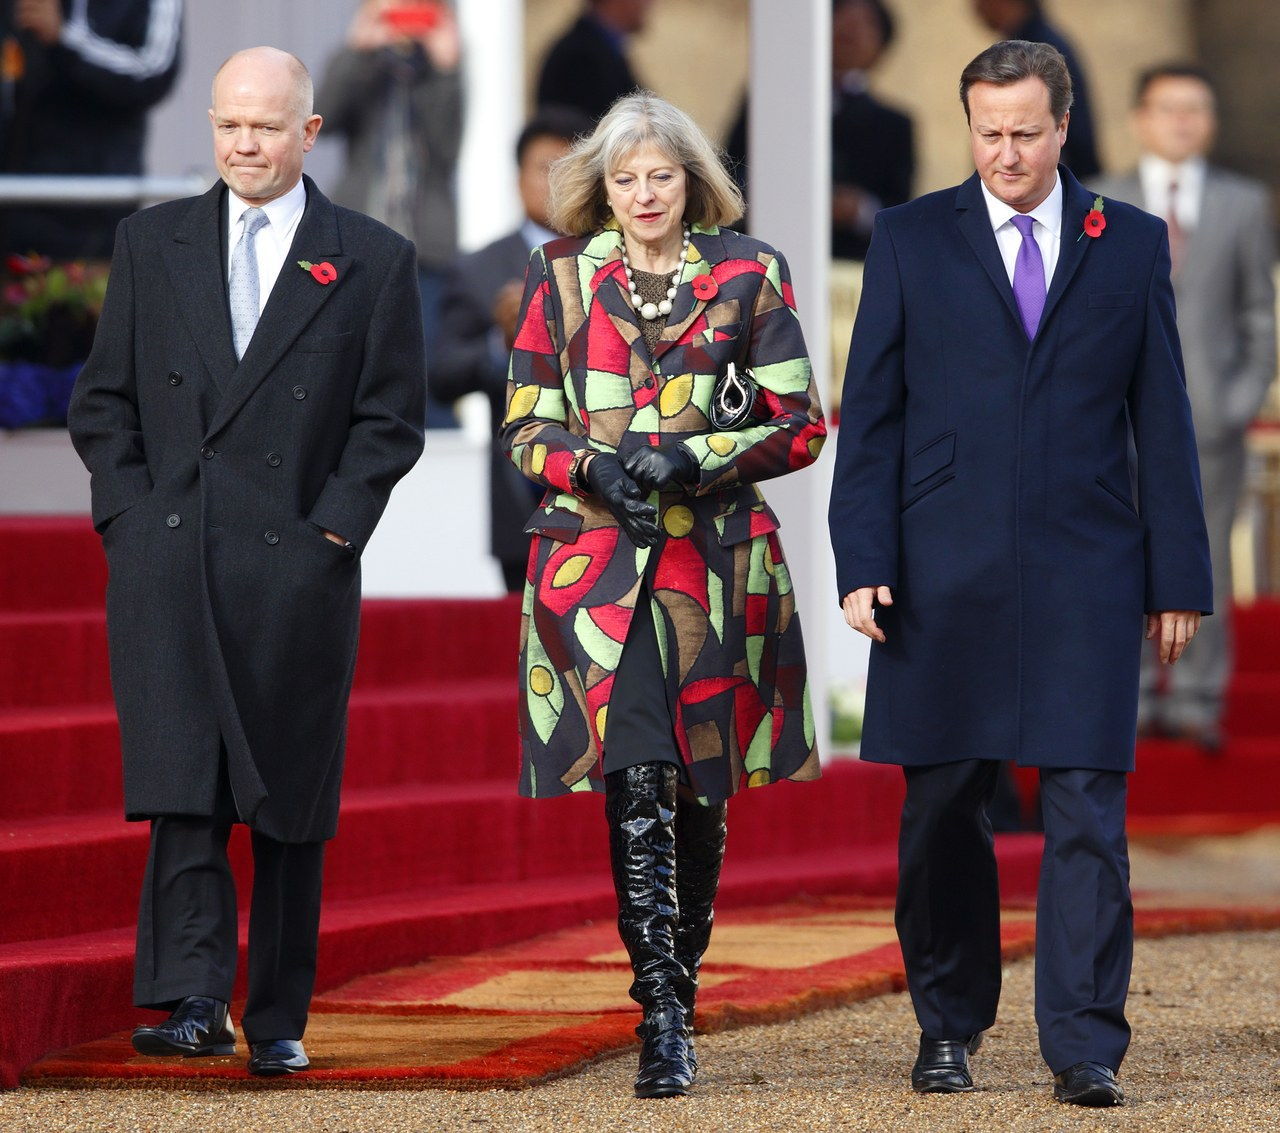 LONDON، UNITED KINGDOM - NOVEMBER 05: (EMBARGOED FOR PUBLICATION IN UK NEWSPAPERS UNTIL 48 HOURS AFTER CREATE DATE AND TIME) Foreign Secretary William Hague, Home Secretary Theresa May and Prime Minister David Cameron attend the Ceremonial Welcome for The President of the Republic of Korea, Park Geun-hye at Horse Guards Parade on November 5, 2013 in London, England. The President of the Republic of Korea Park Geun-hye is on a state visit to the UK from November 5-7. (Photo by Max Mumby/Indigo/Getty Images)